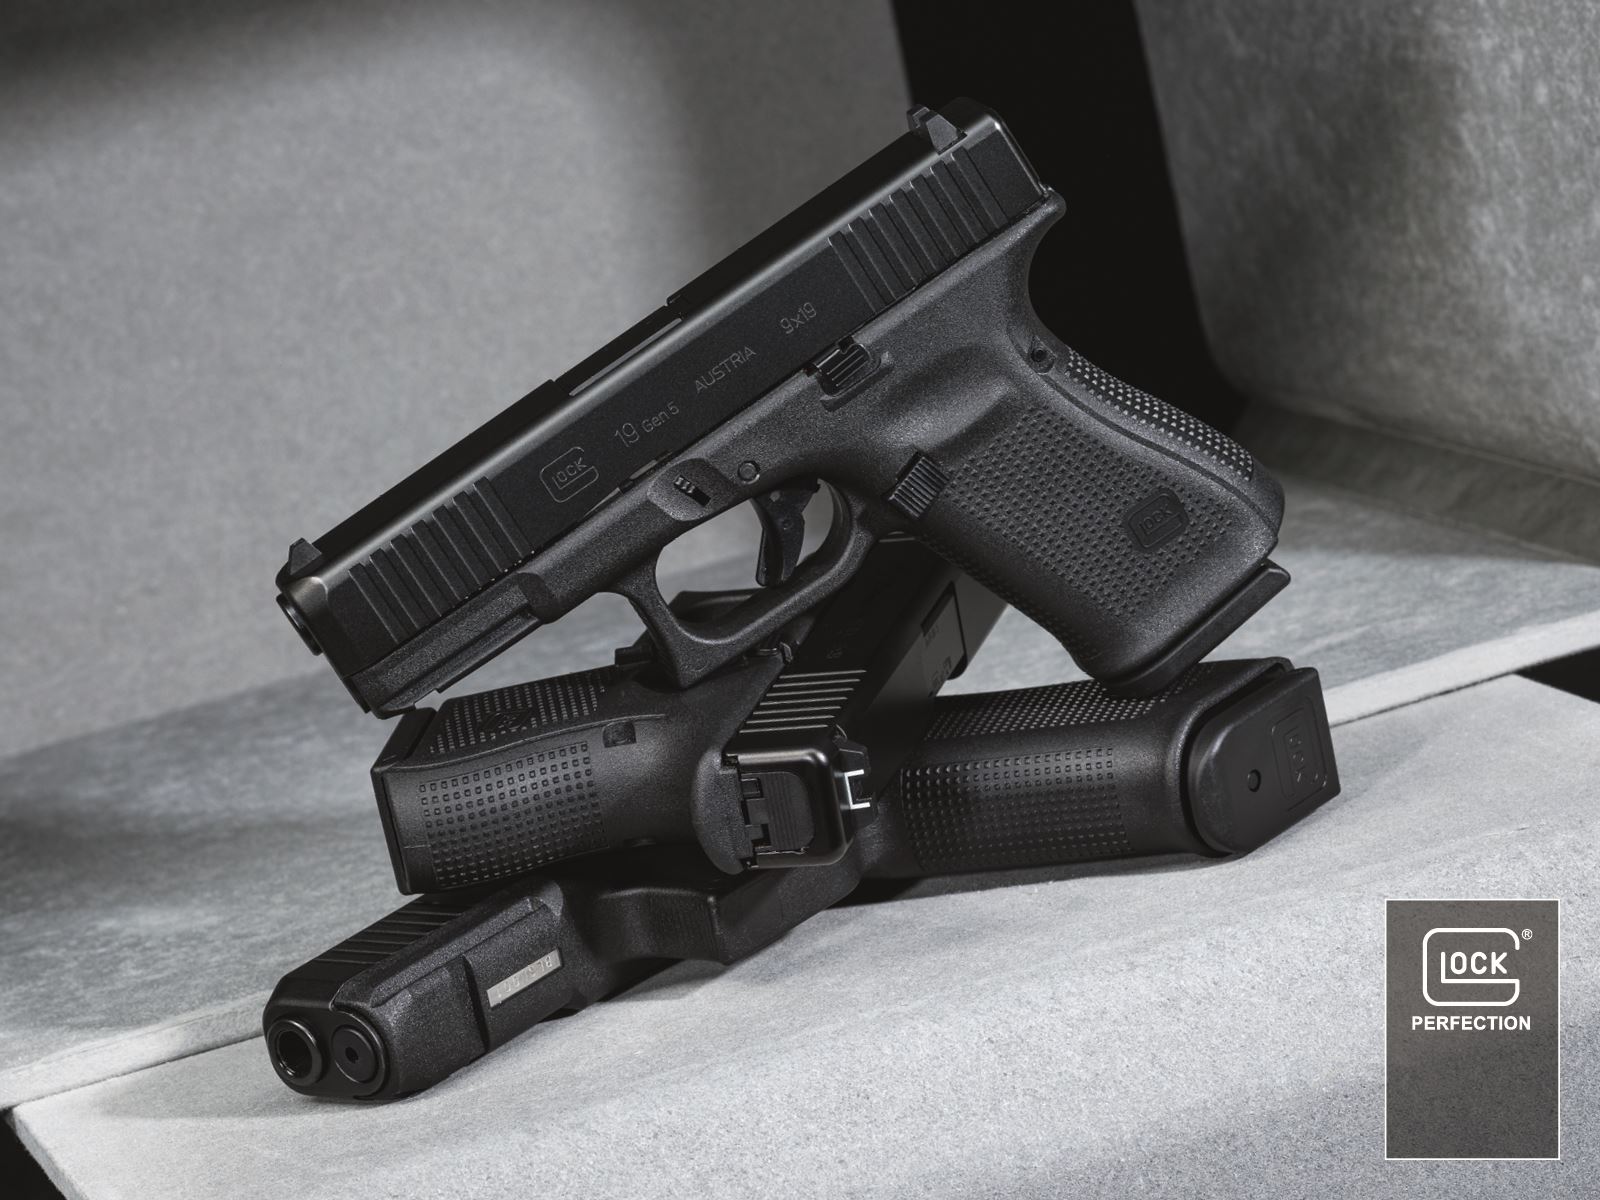 GLOCK Perfection | Download area